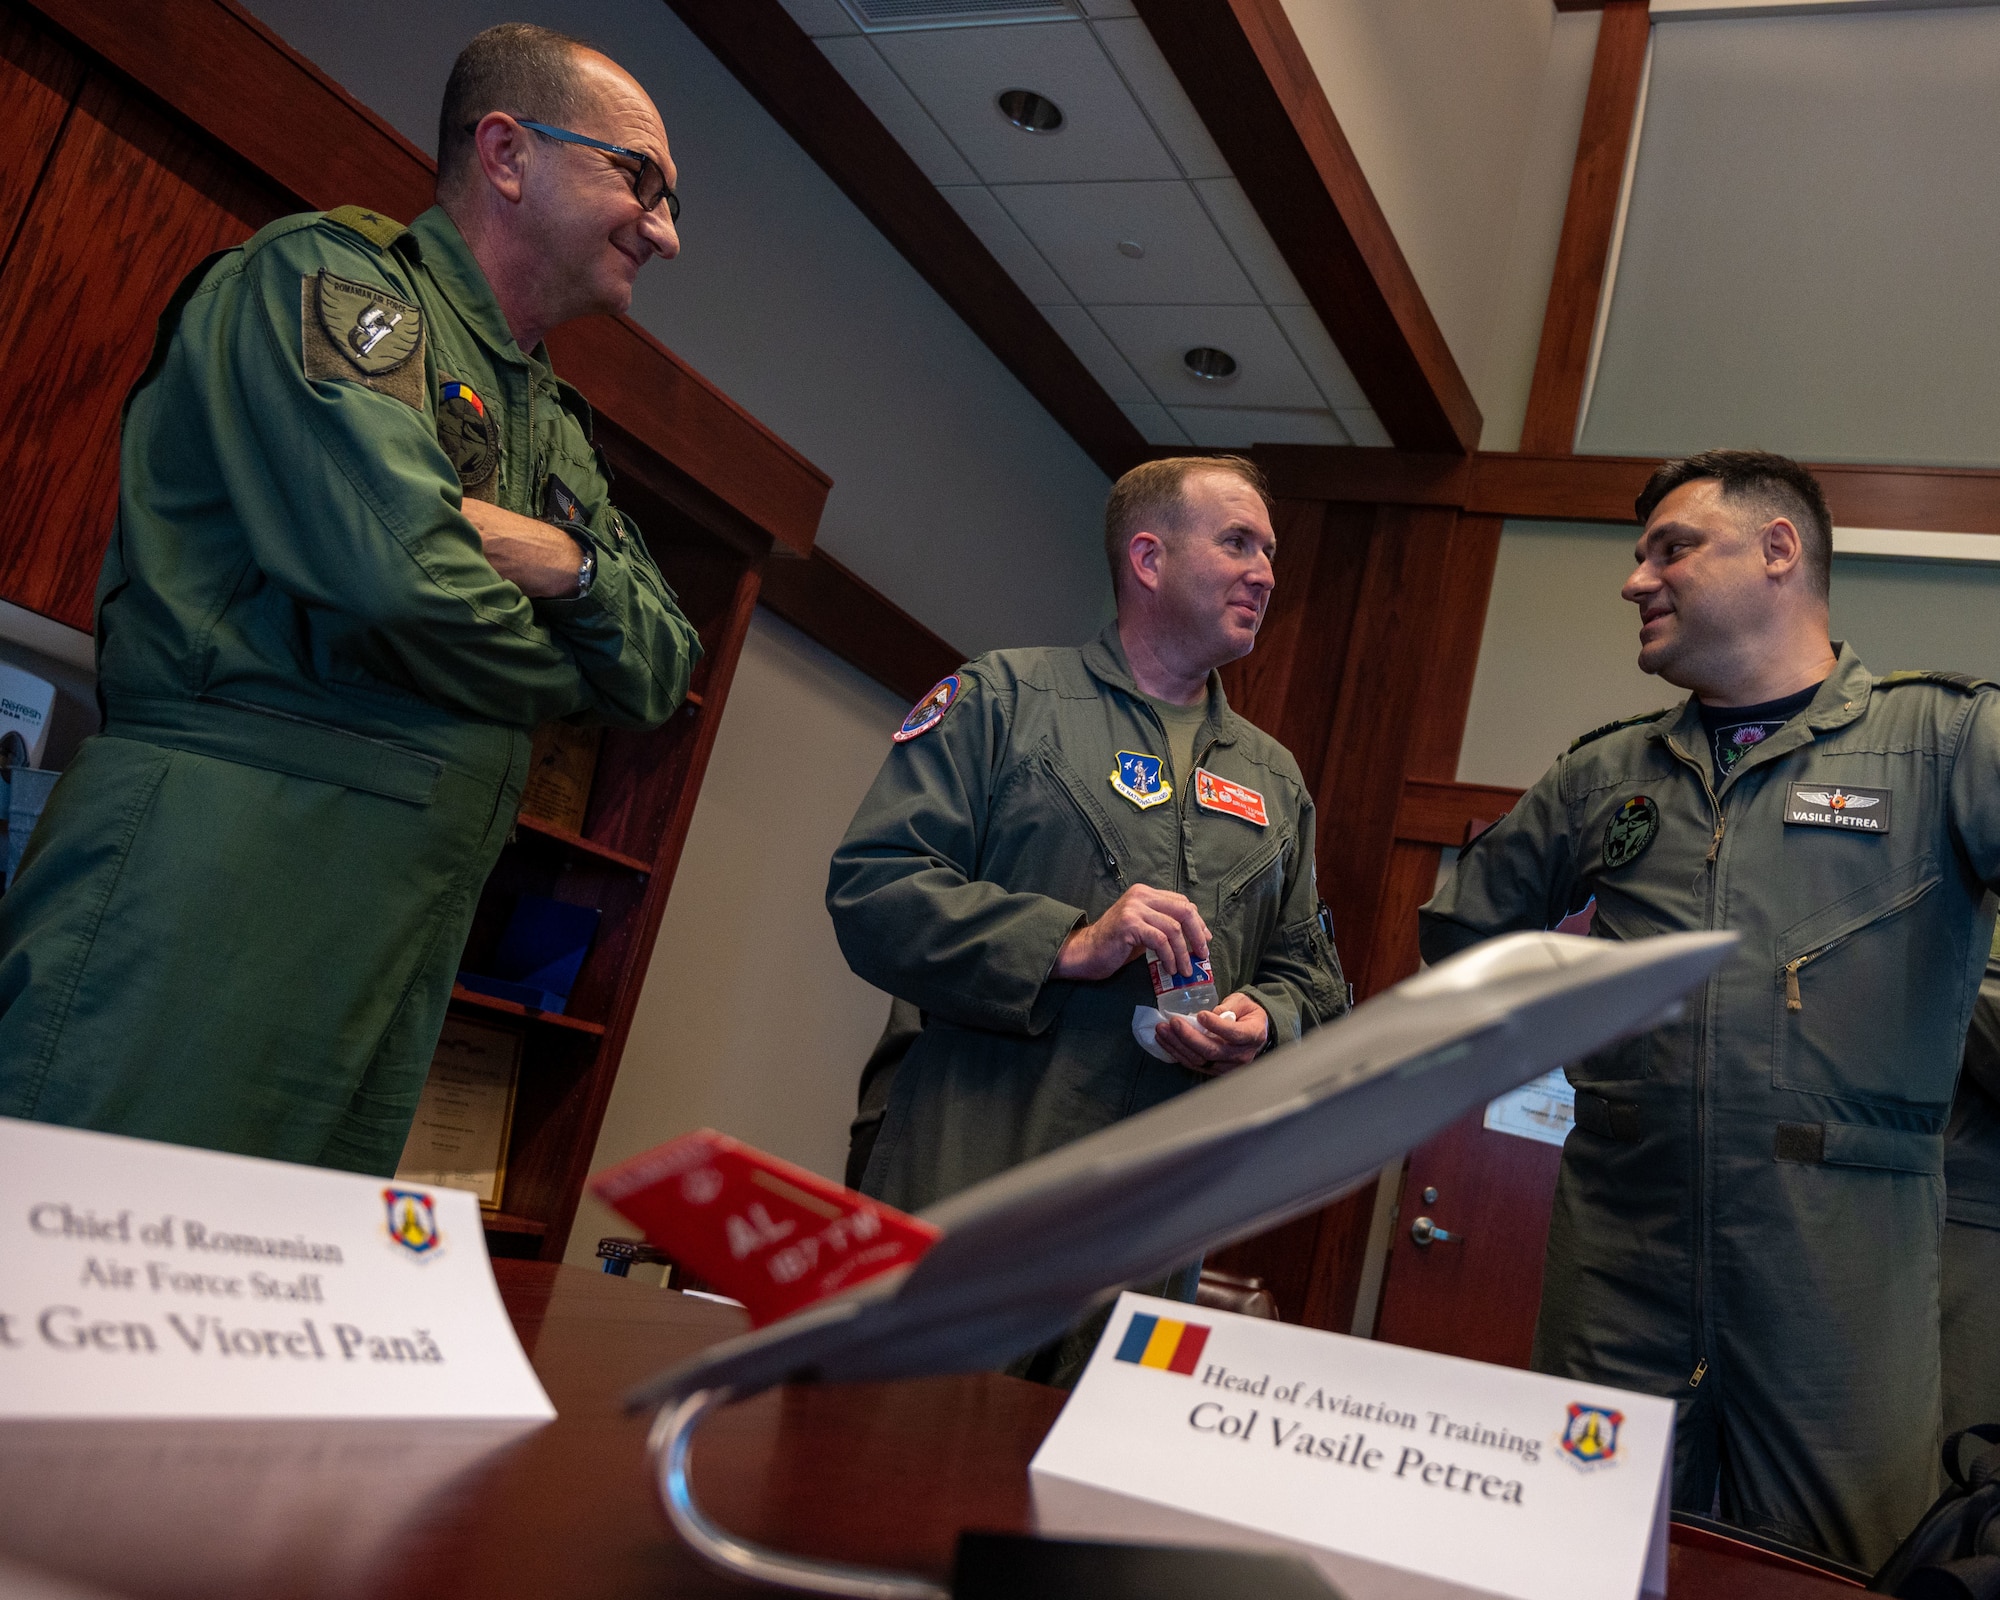 The 187th Fighter Wing has hosted a State Partnership program with the Romanian Air Force since 1993. The two air forces fly F-16 missions together at Dannelly Field. The 187th is scheduled to transition from F-16s to F-35s, and the wing also provided an F-35 conversion tour for Pană the Romanian delegation.